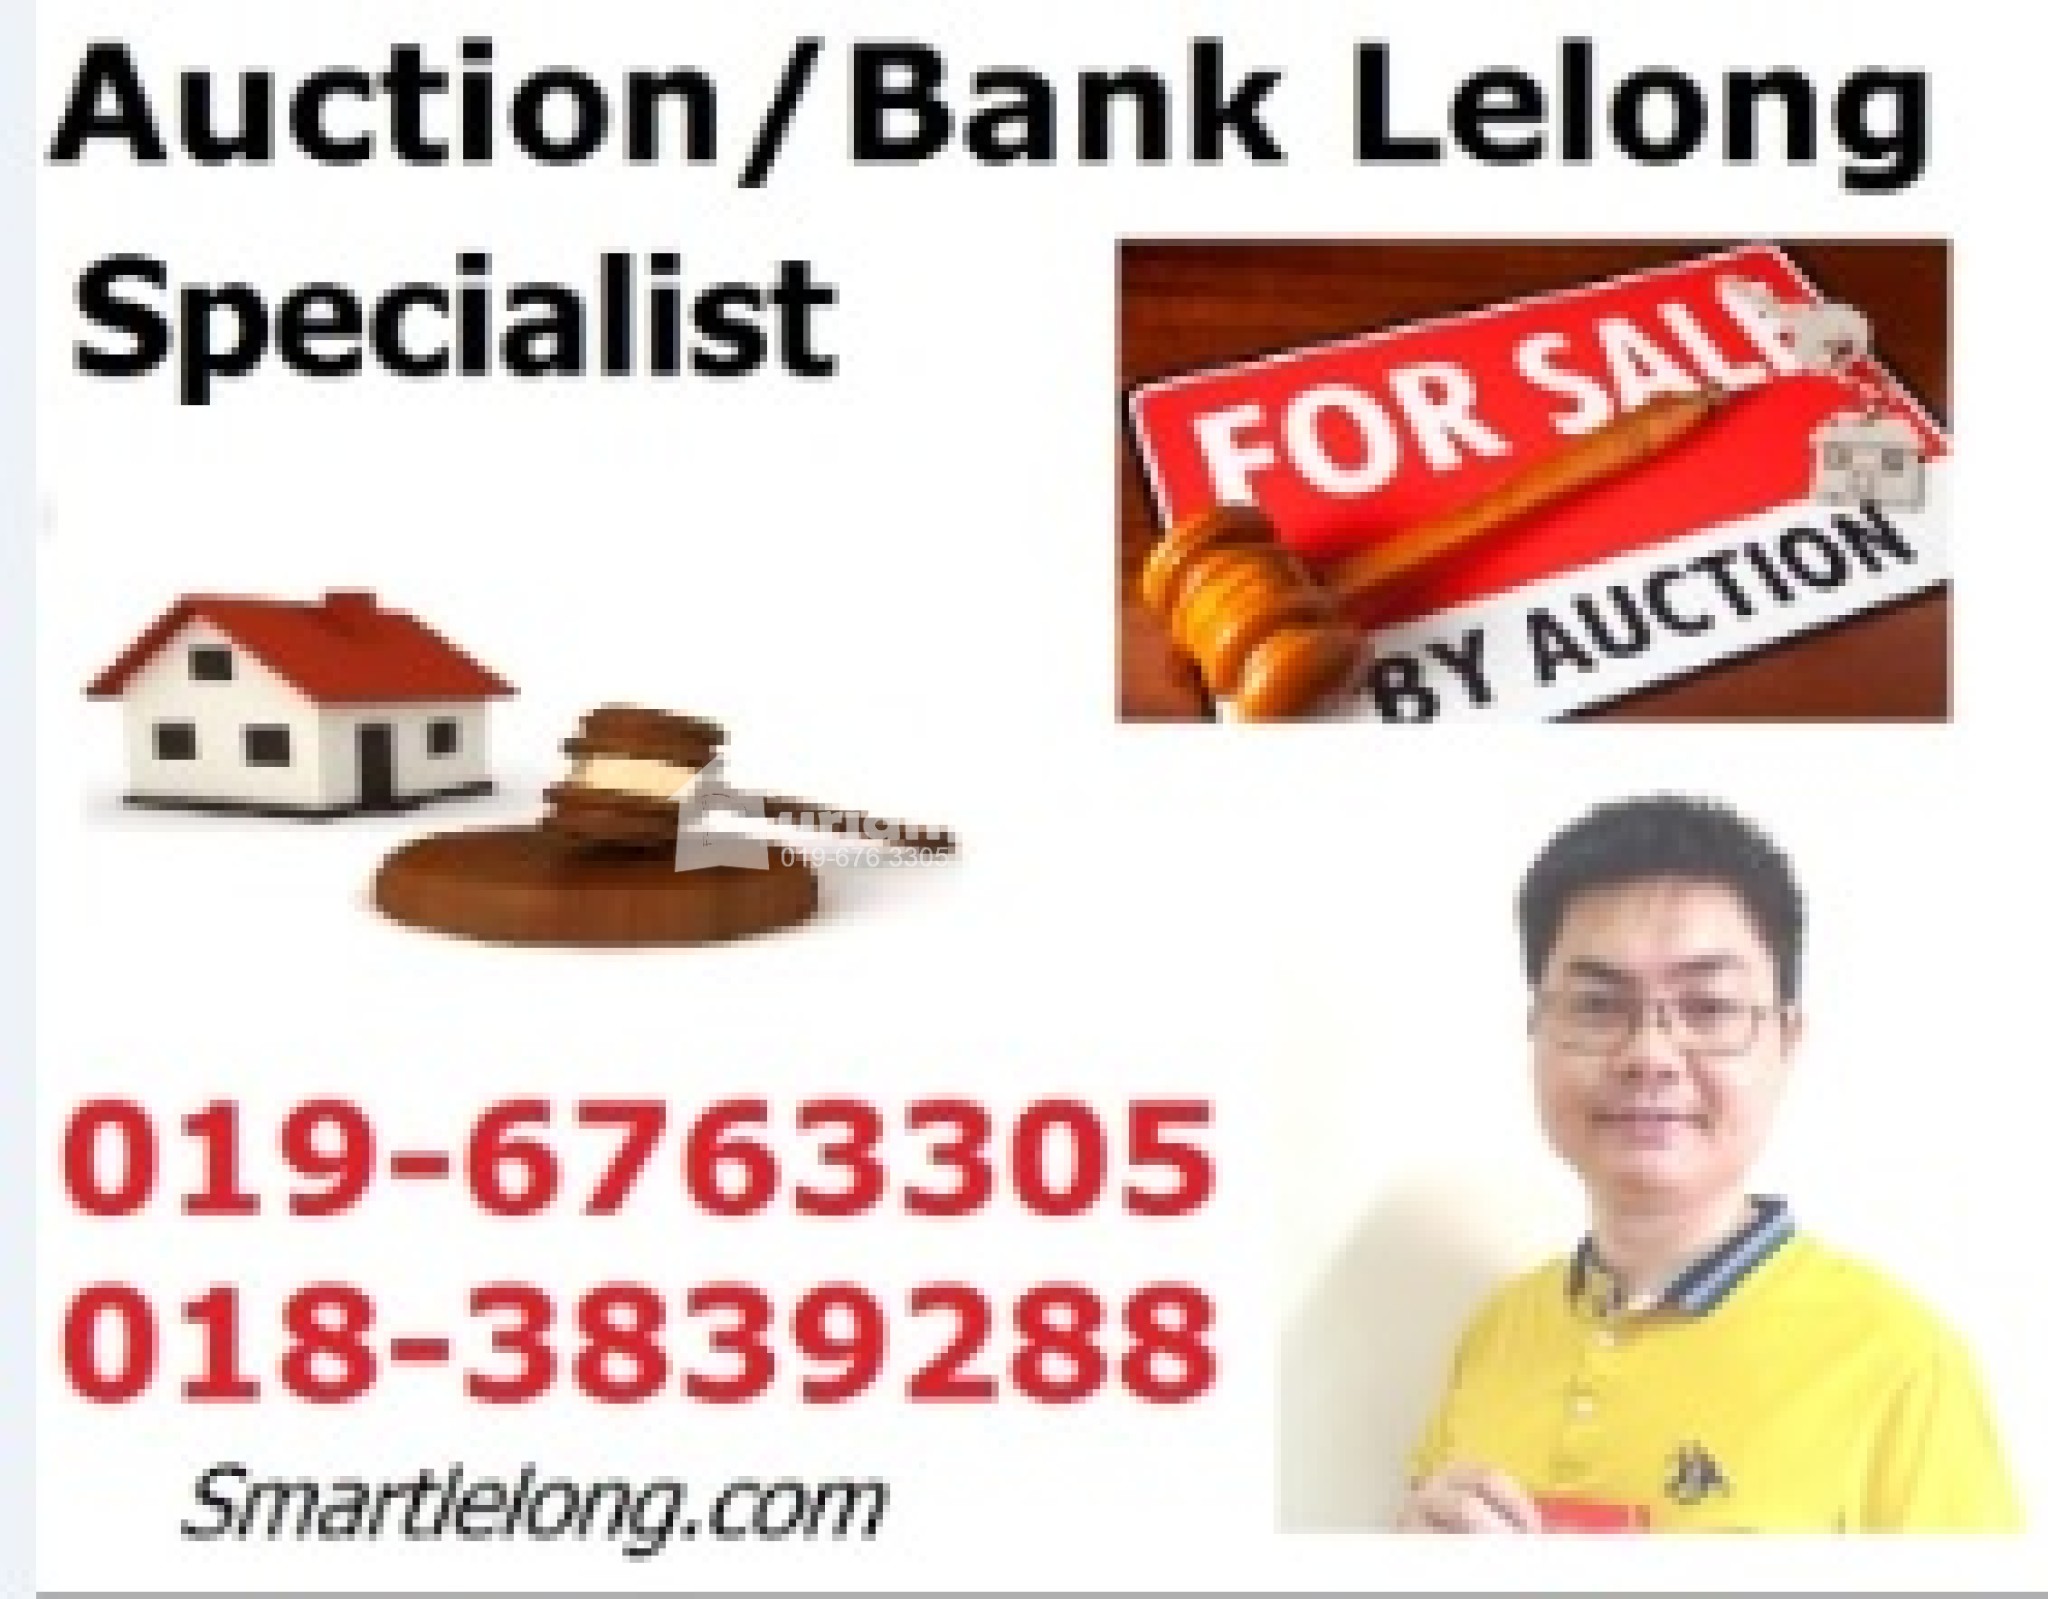 Terrace House For Auction at Taman Scientex